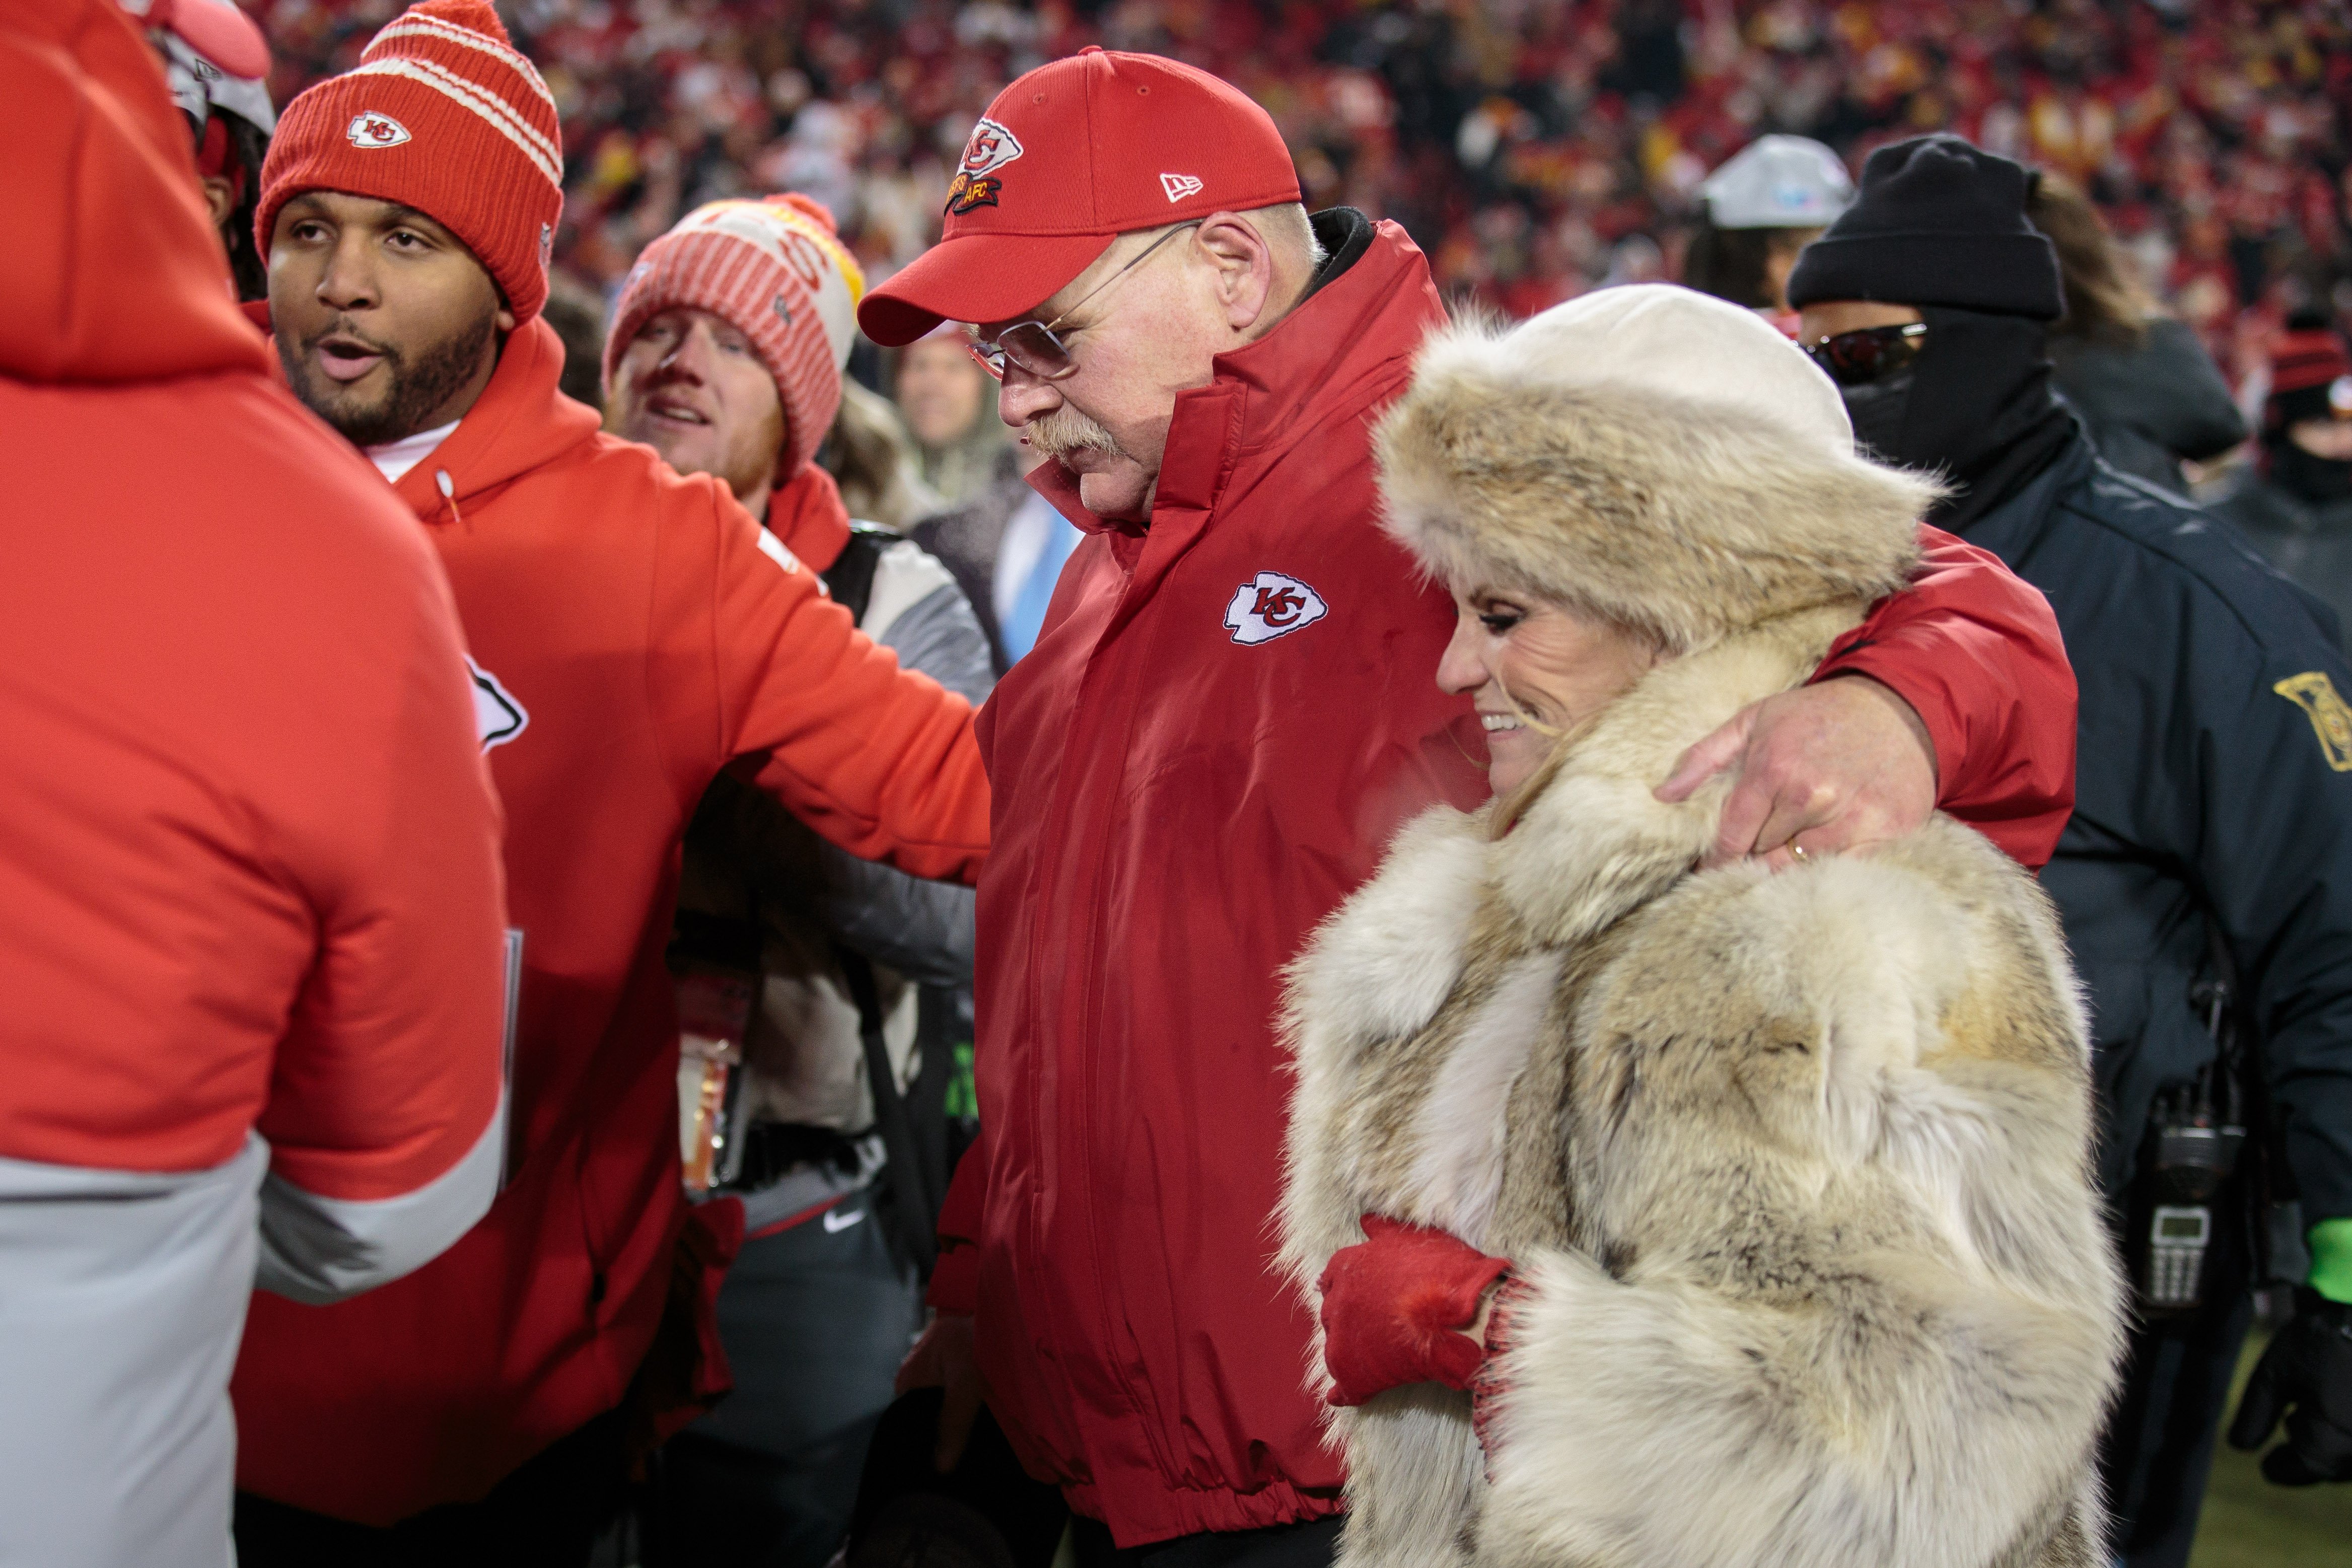 Andy Reid and Tammy Reid after the game against the Cincinnati Bengals on January 29th, 2023, at Arrowhead Stadium in Kansas City, Missouri. | Source: Getty Images